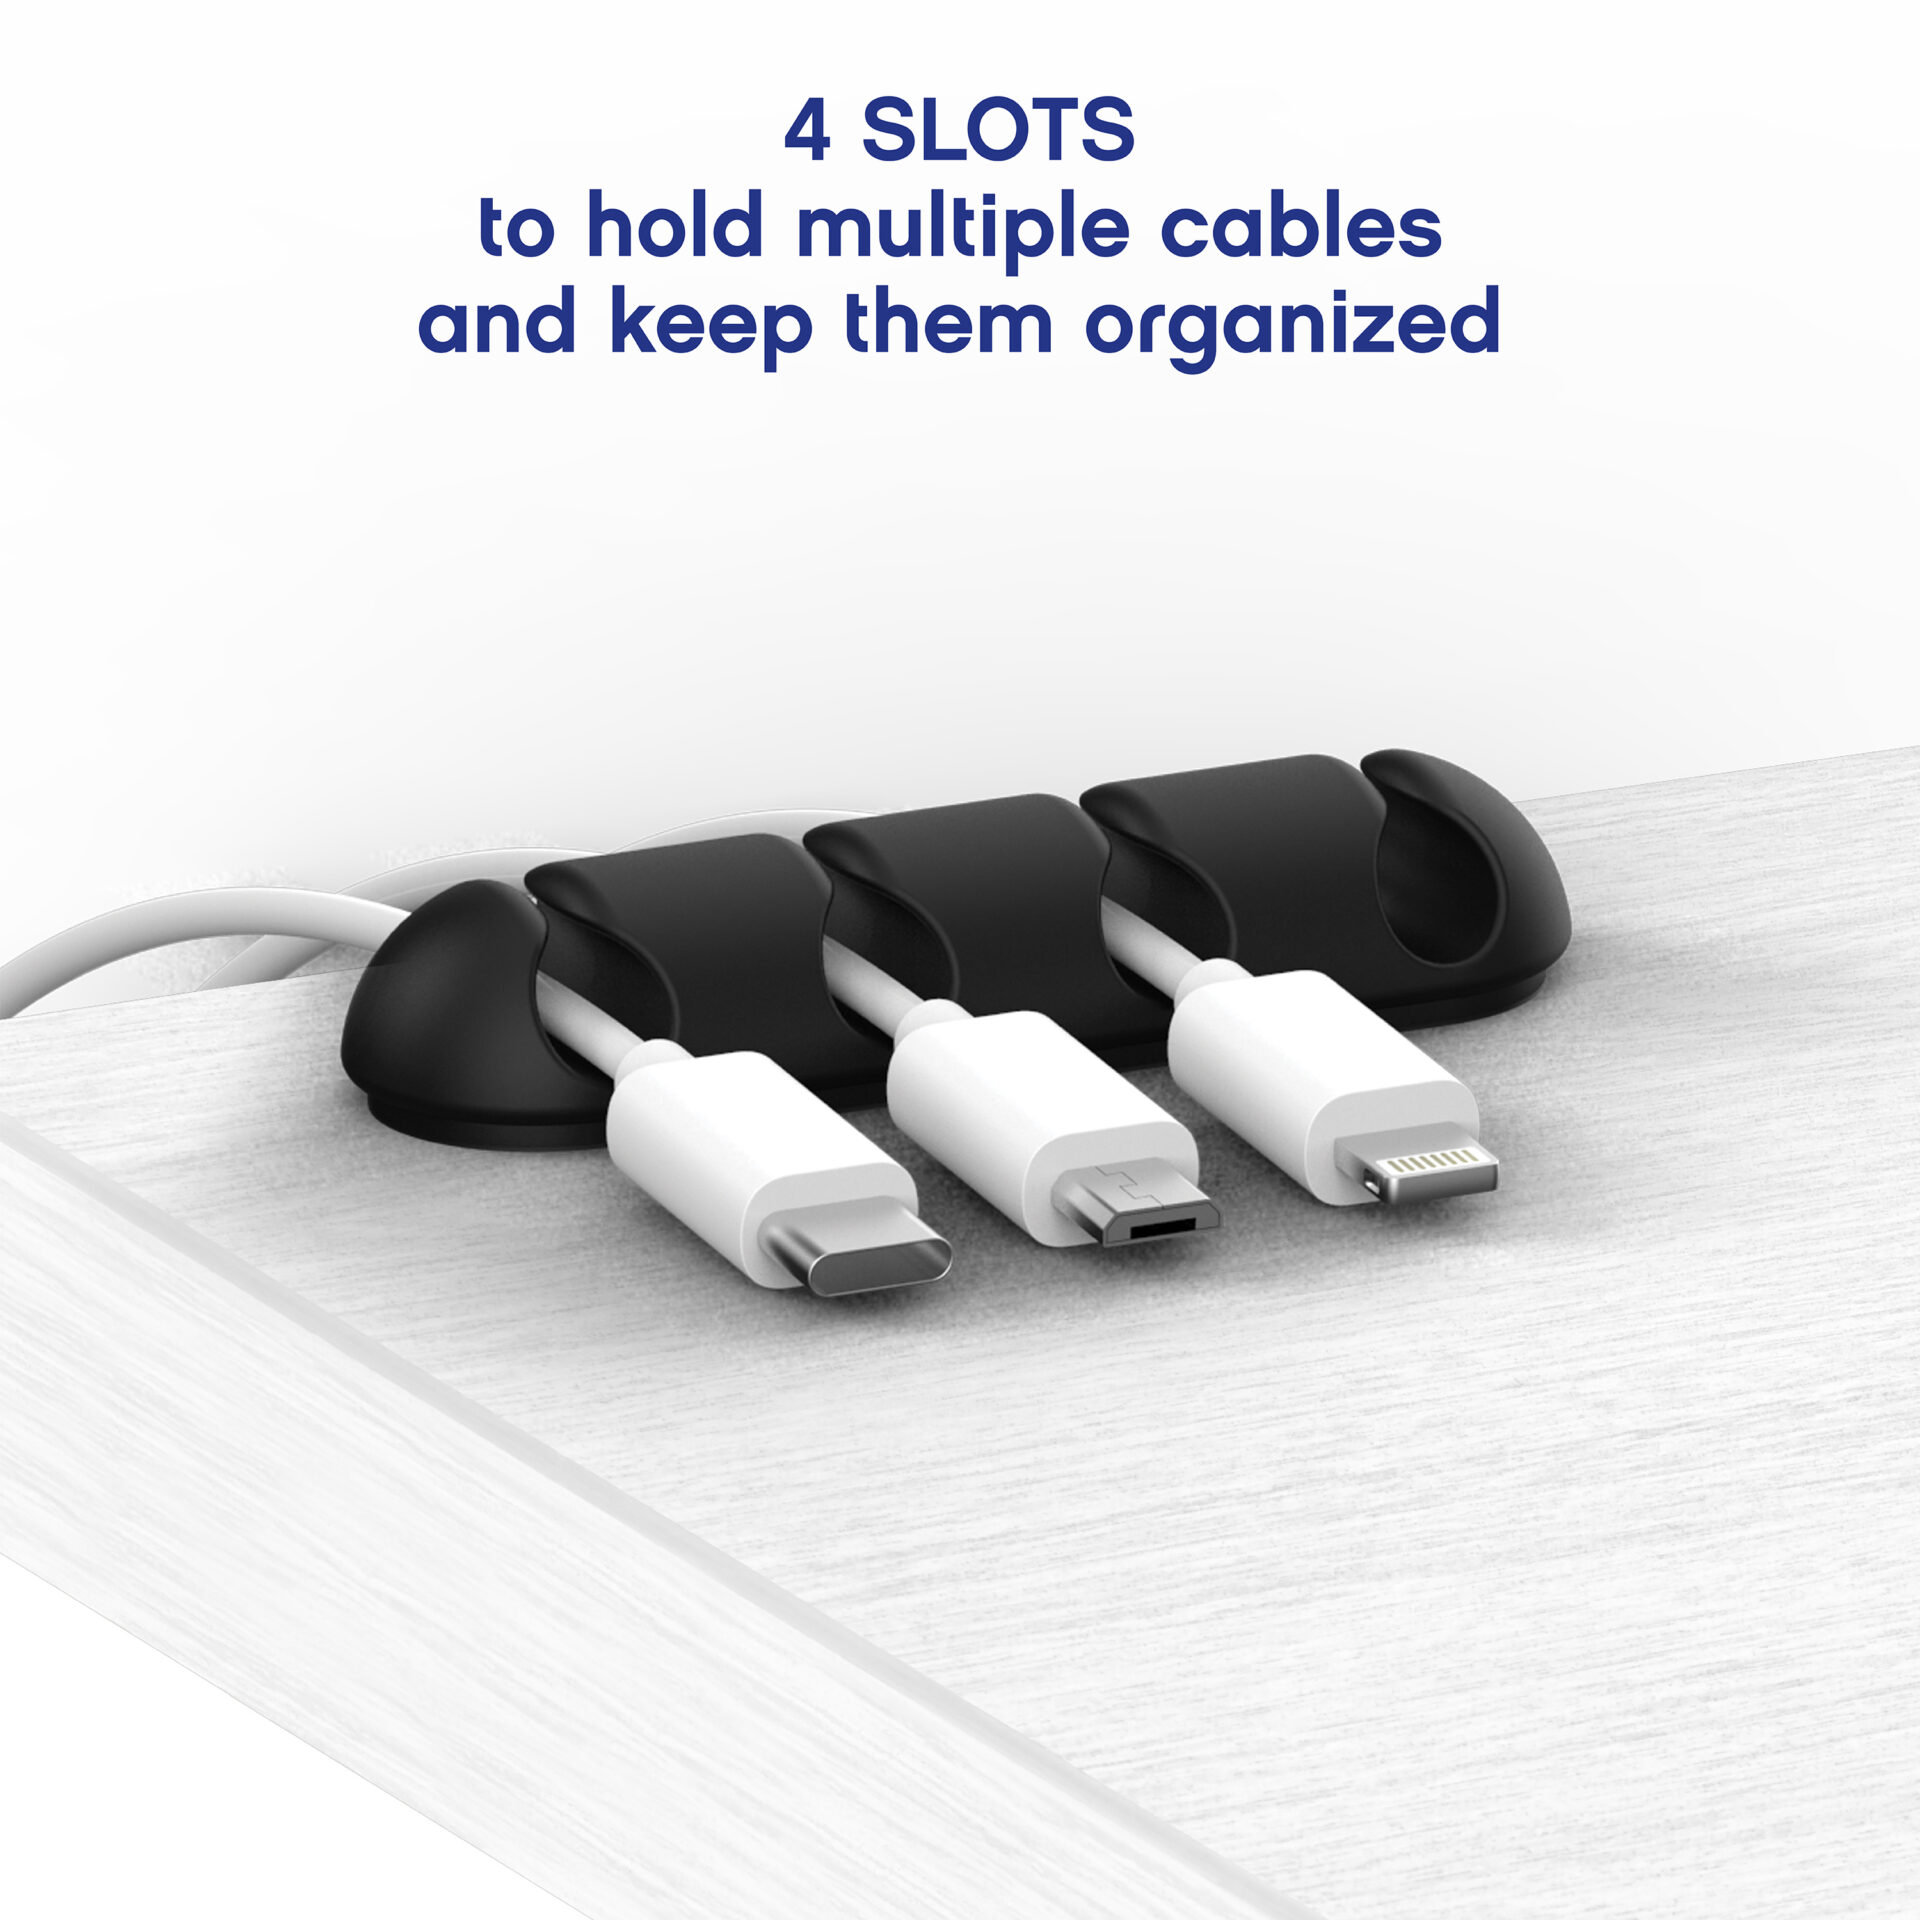 Cable Clips, Cable Management Solutions